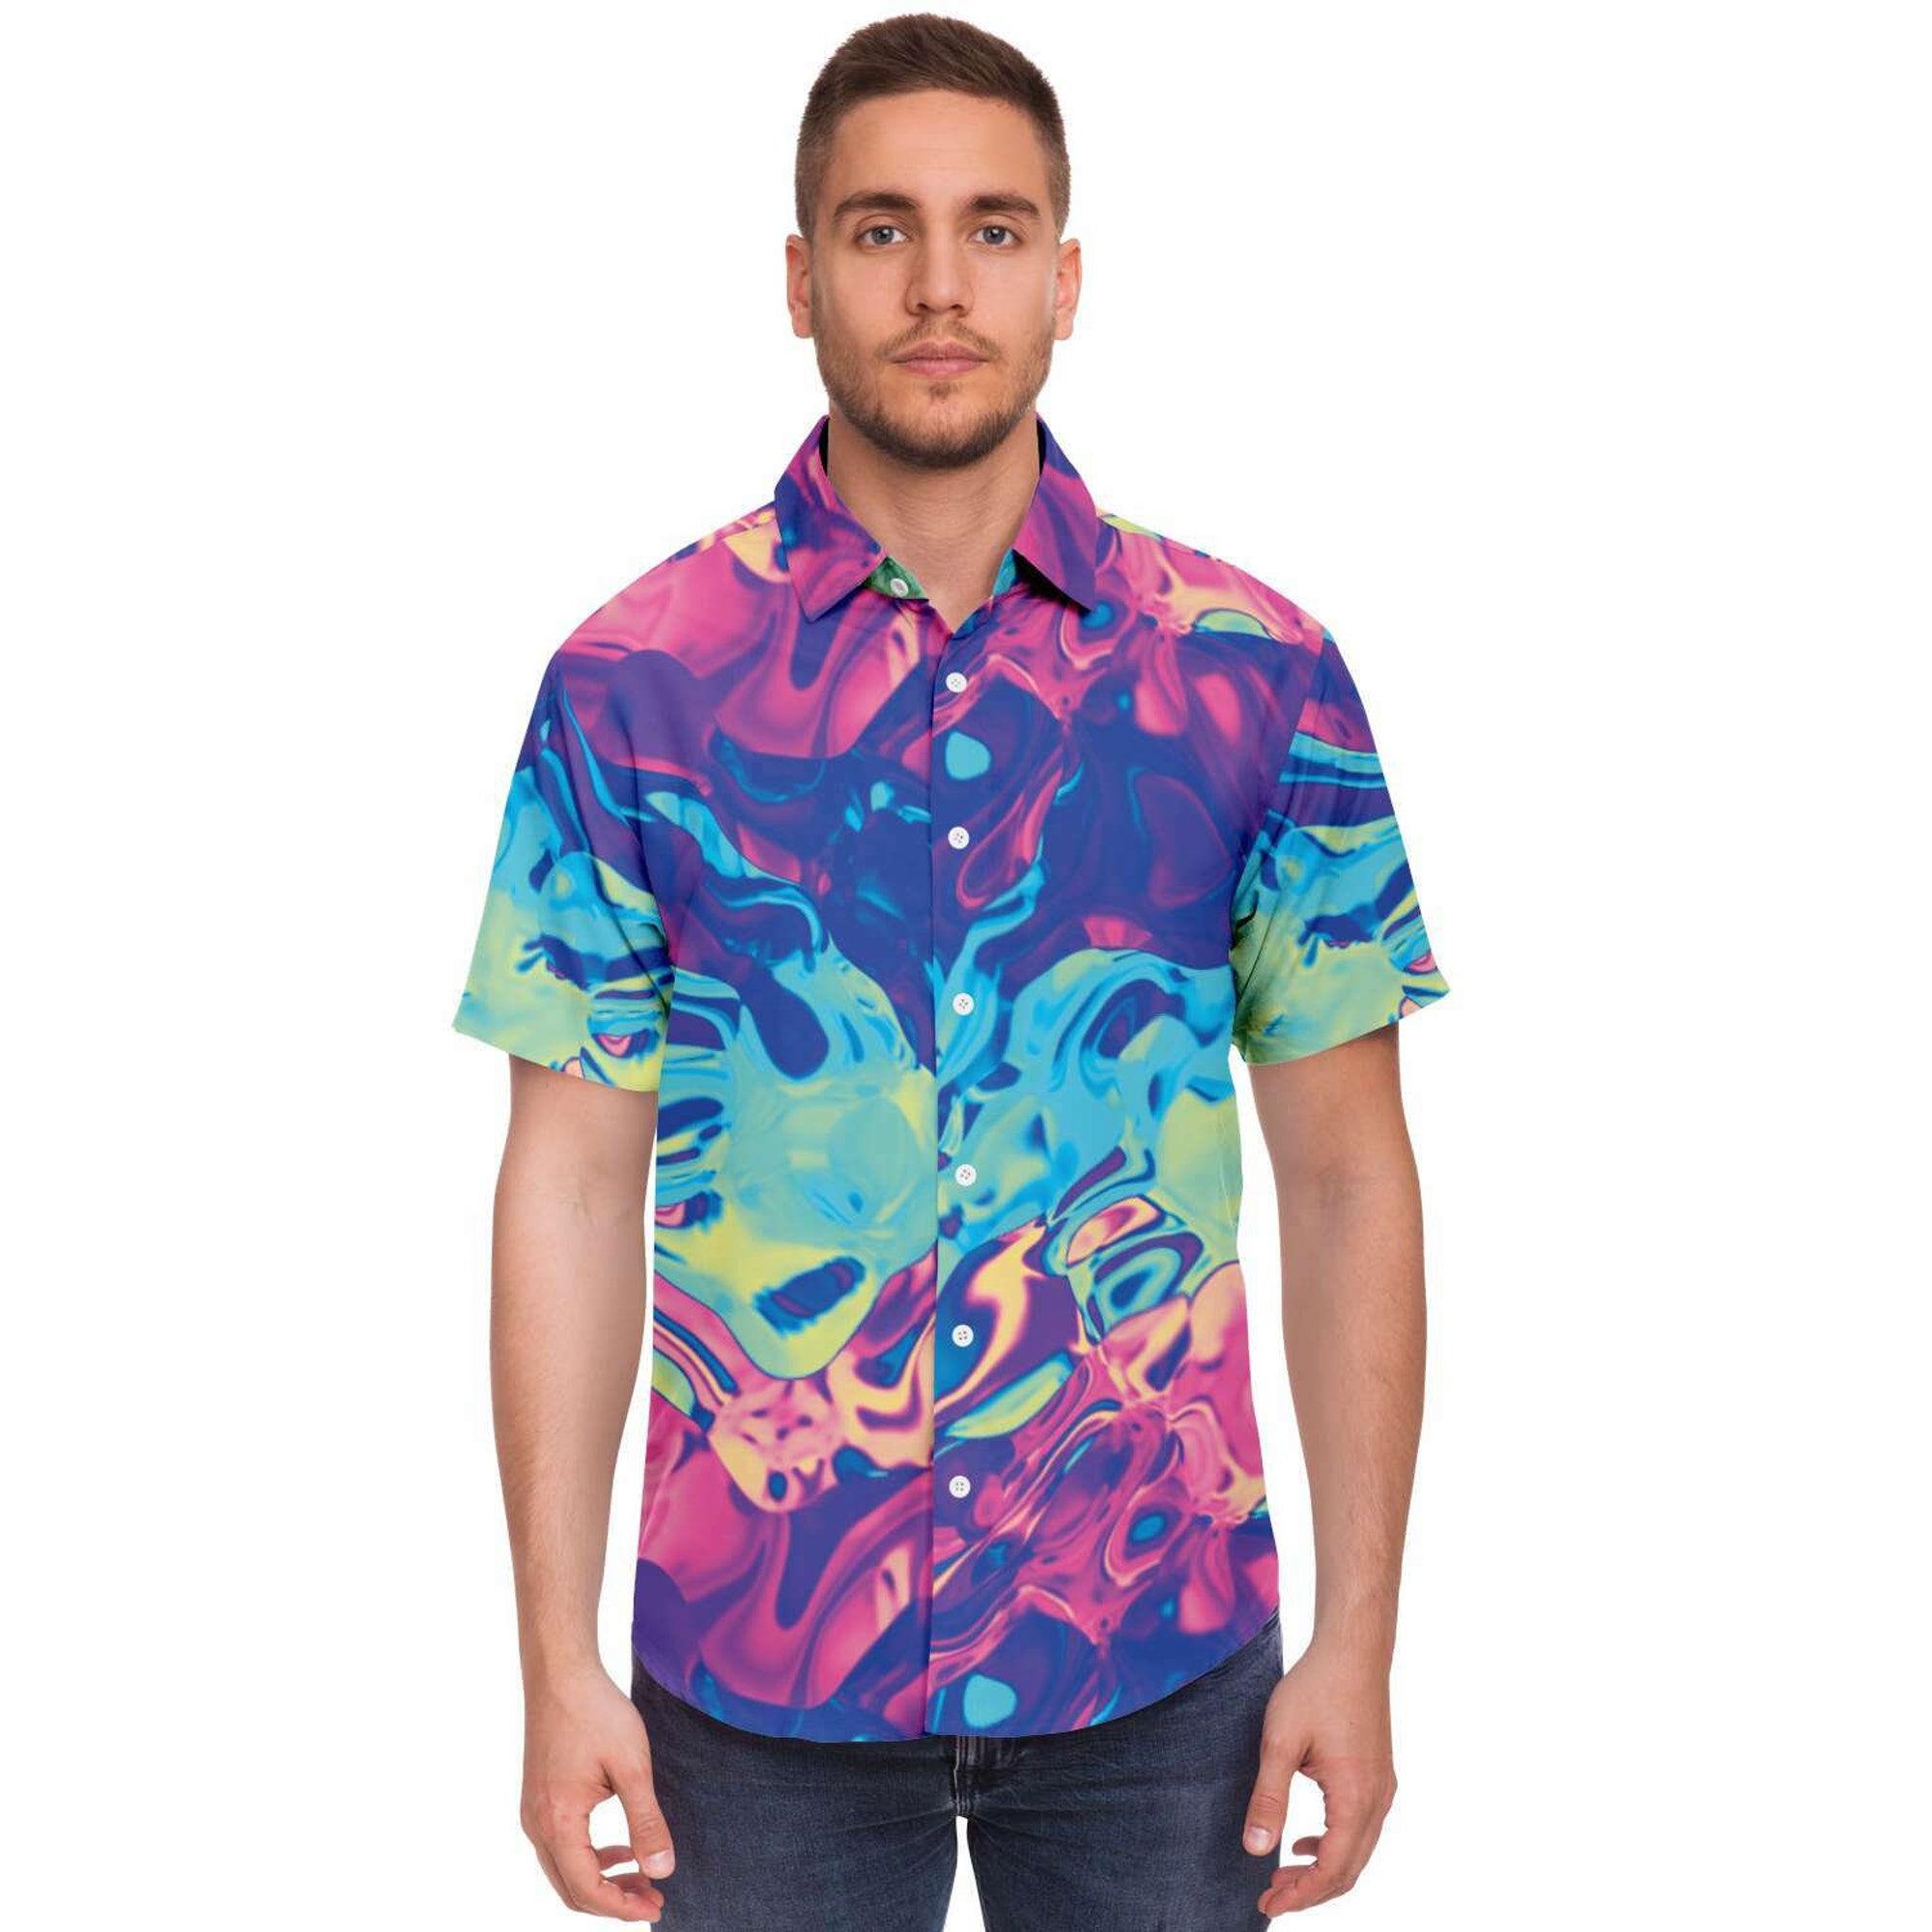 Discover Colorful Holographic Iridescent Buttoned Hawaiian Shirt